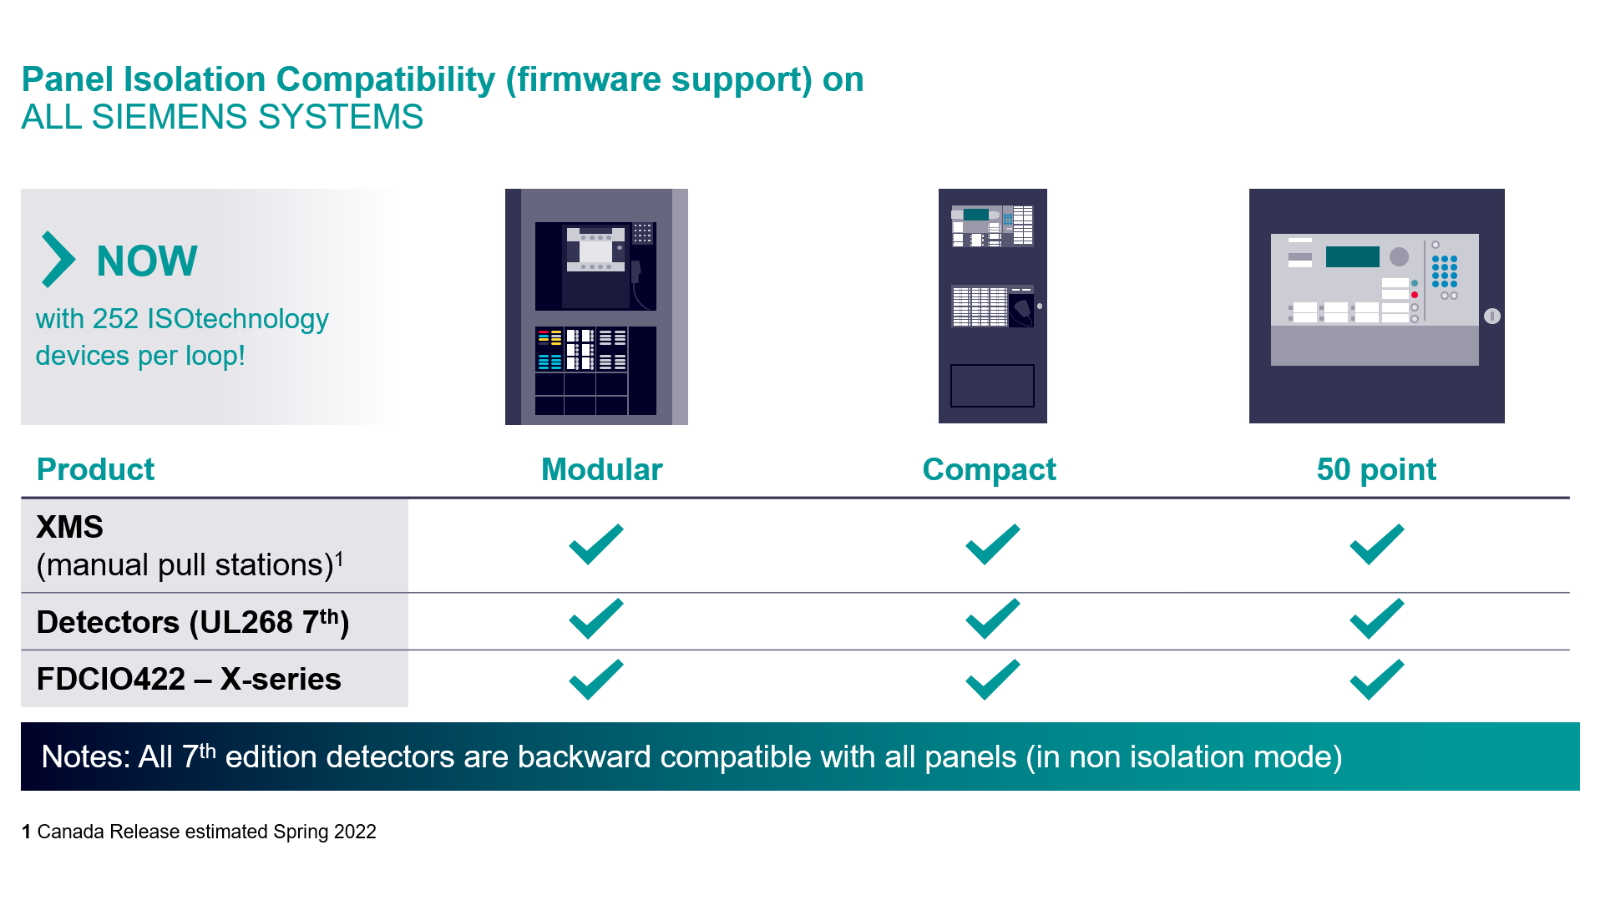 Panel Isolation Compatibility on All Siemens Systems